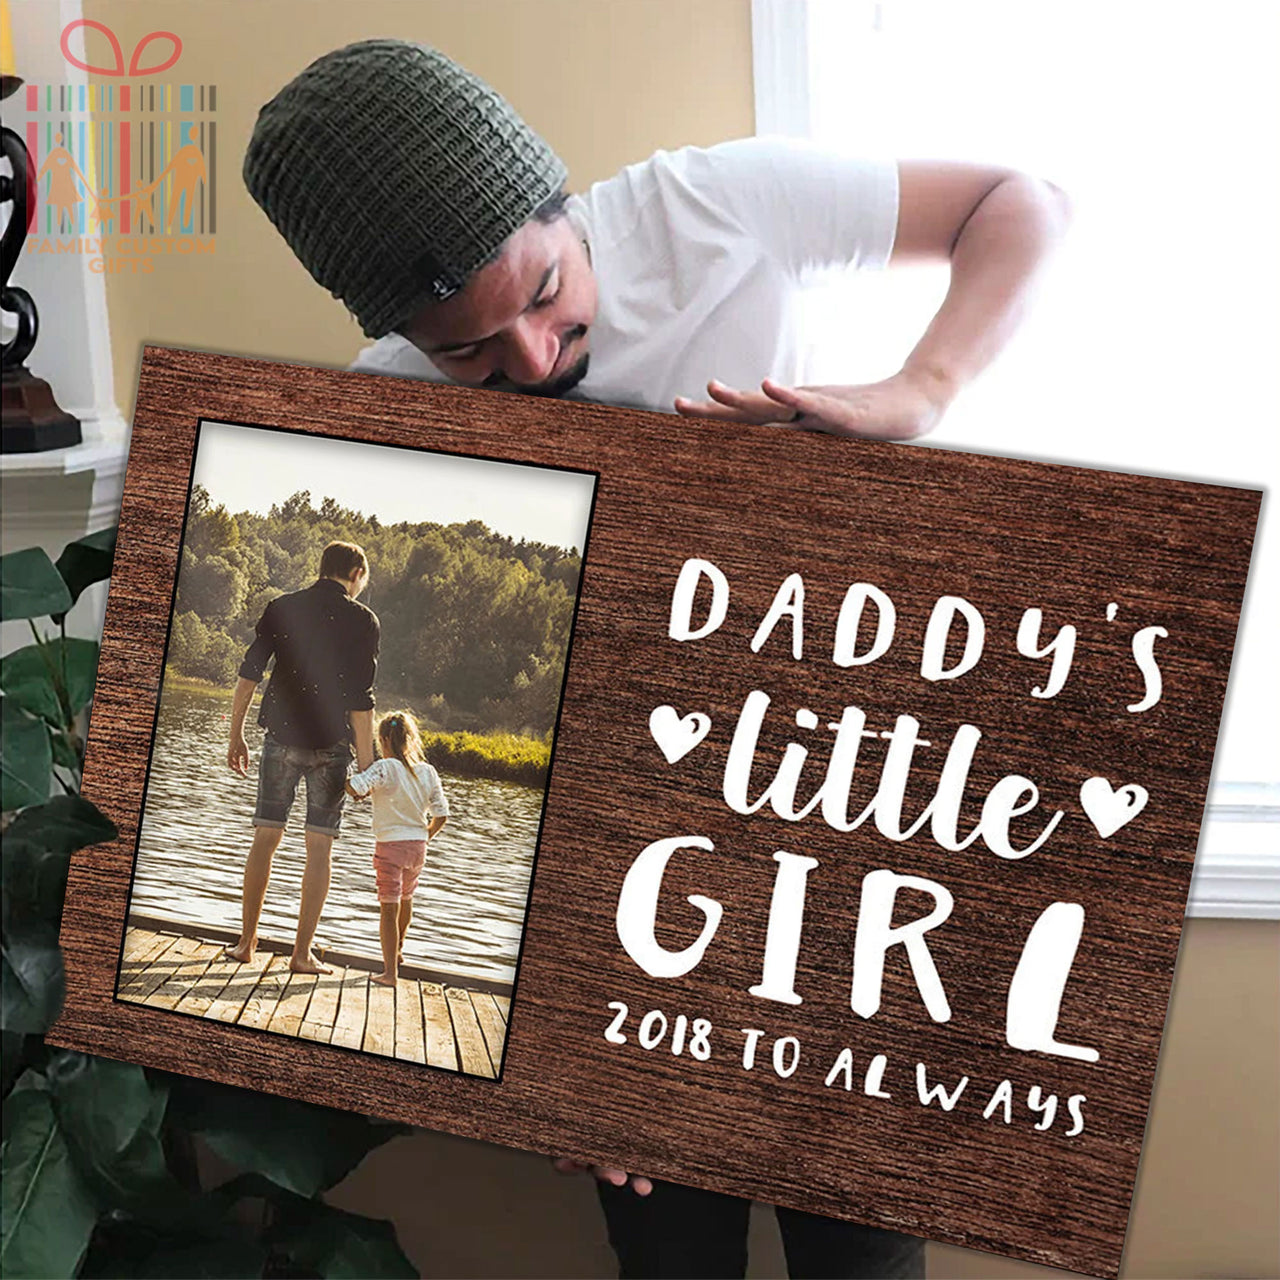 Custom Photo Father's Day Gifts Canvas Print Wall Art for Dad - Personalized To My Dad Wall Art - Gift for Dad